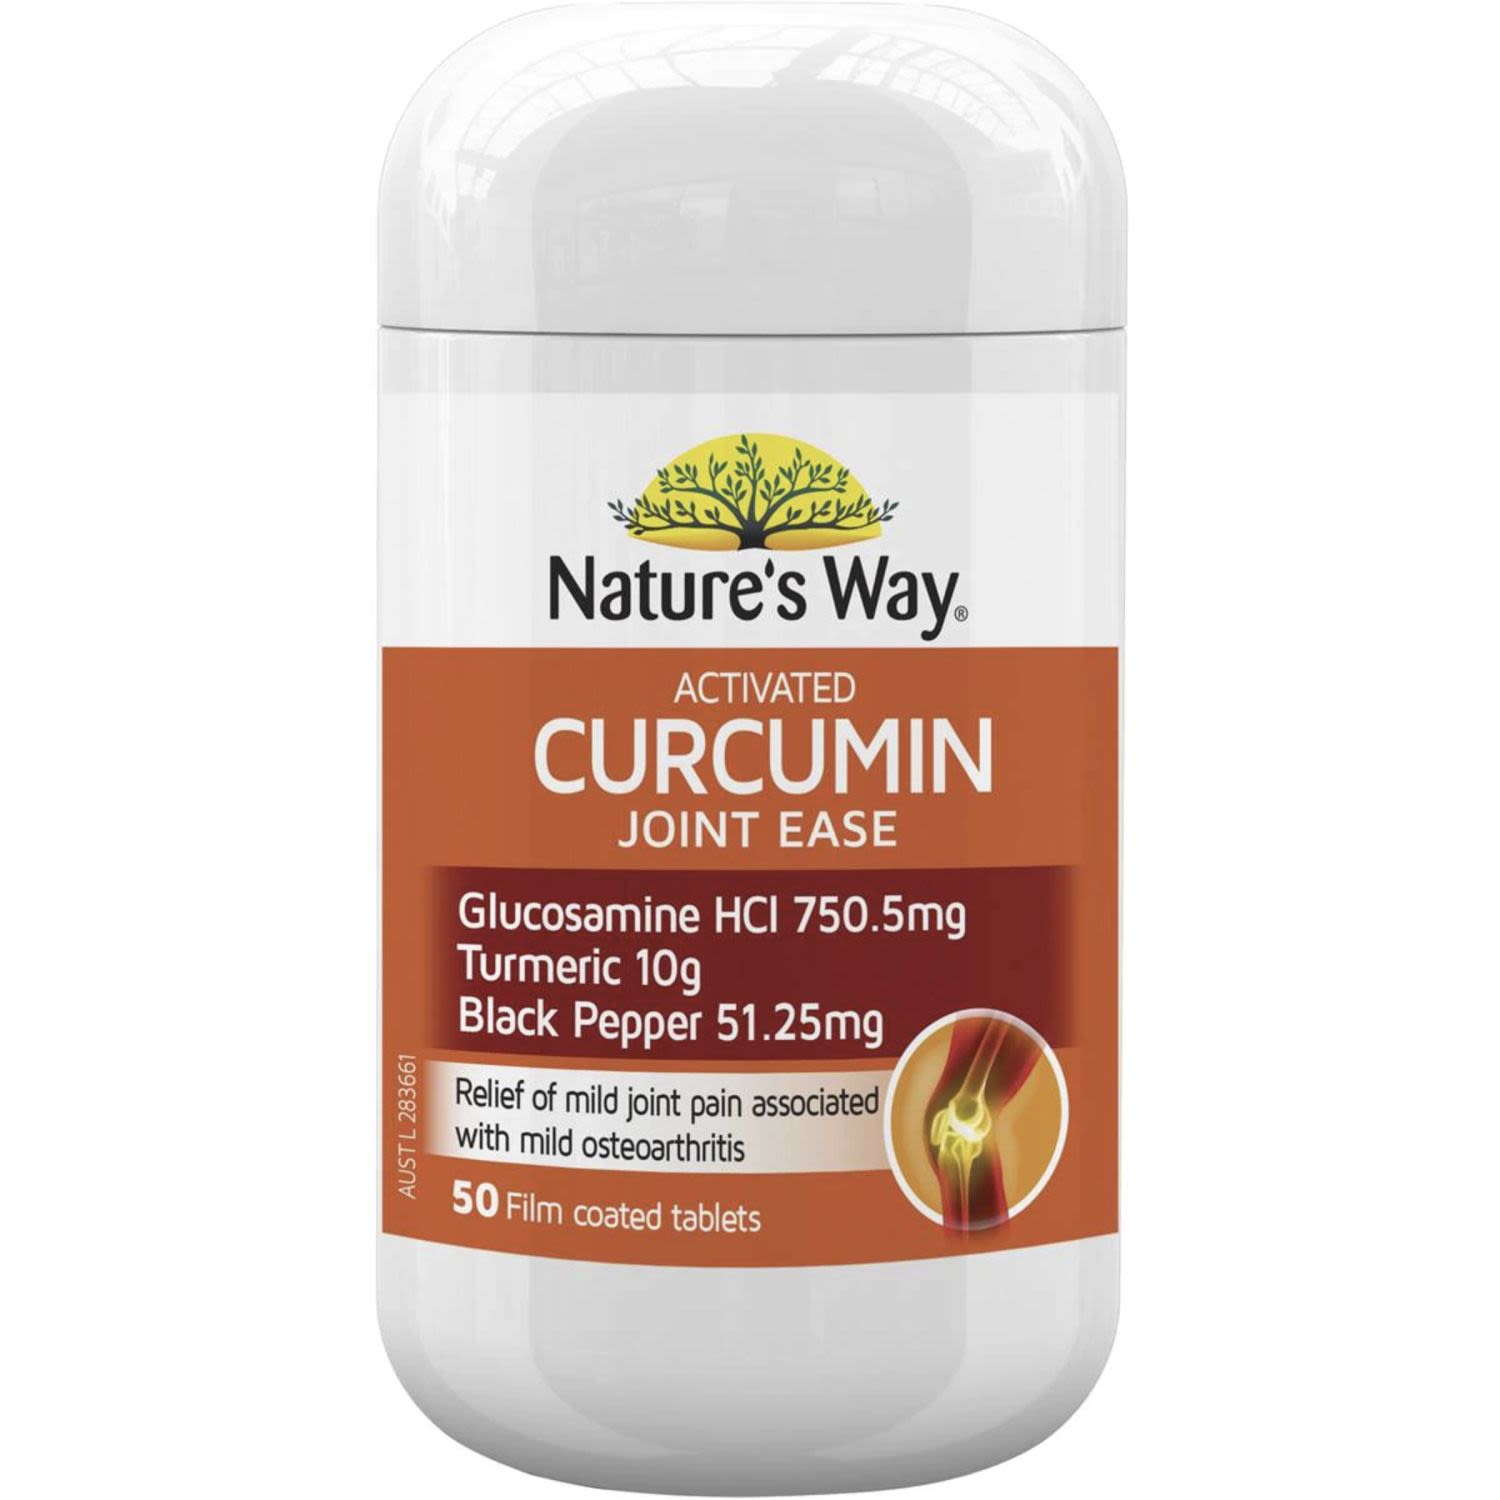 Nature's Way Activated Curcumin, 30 Each